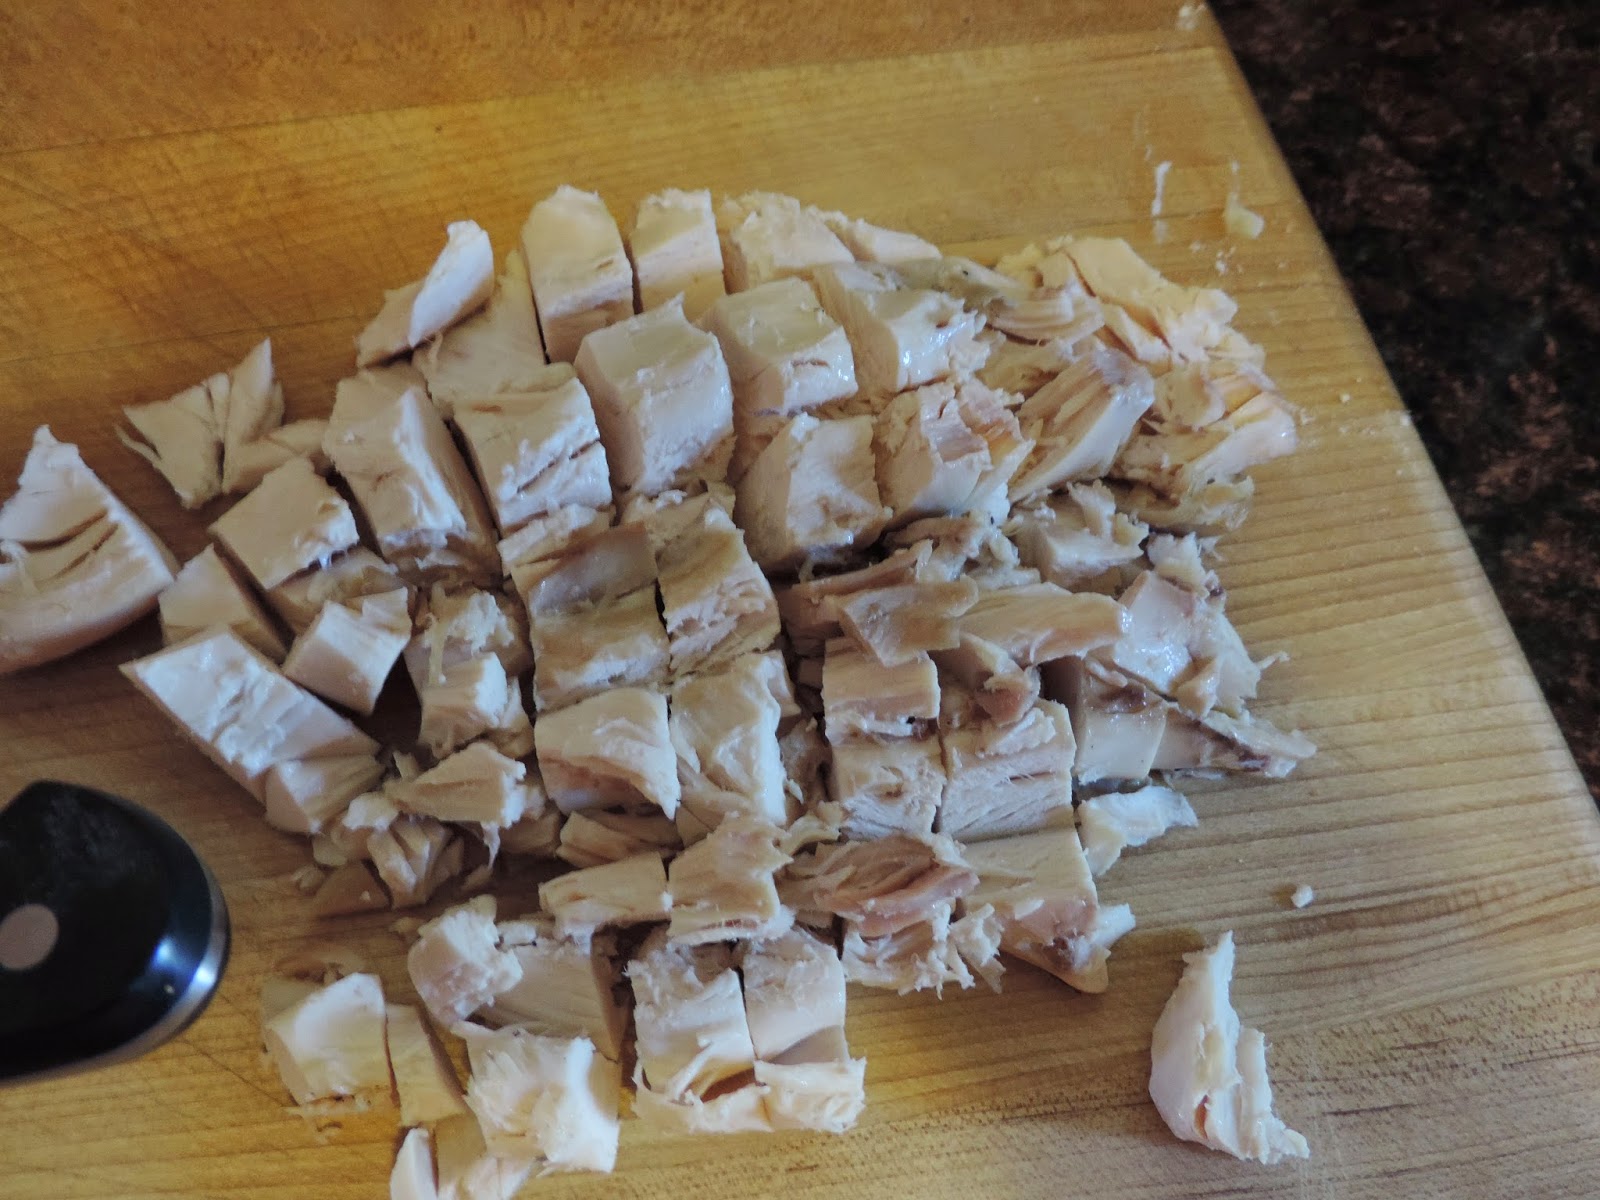 Diced chicken on the cutting board.